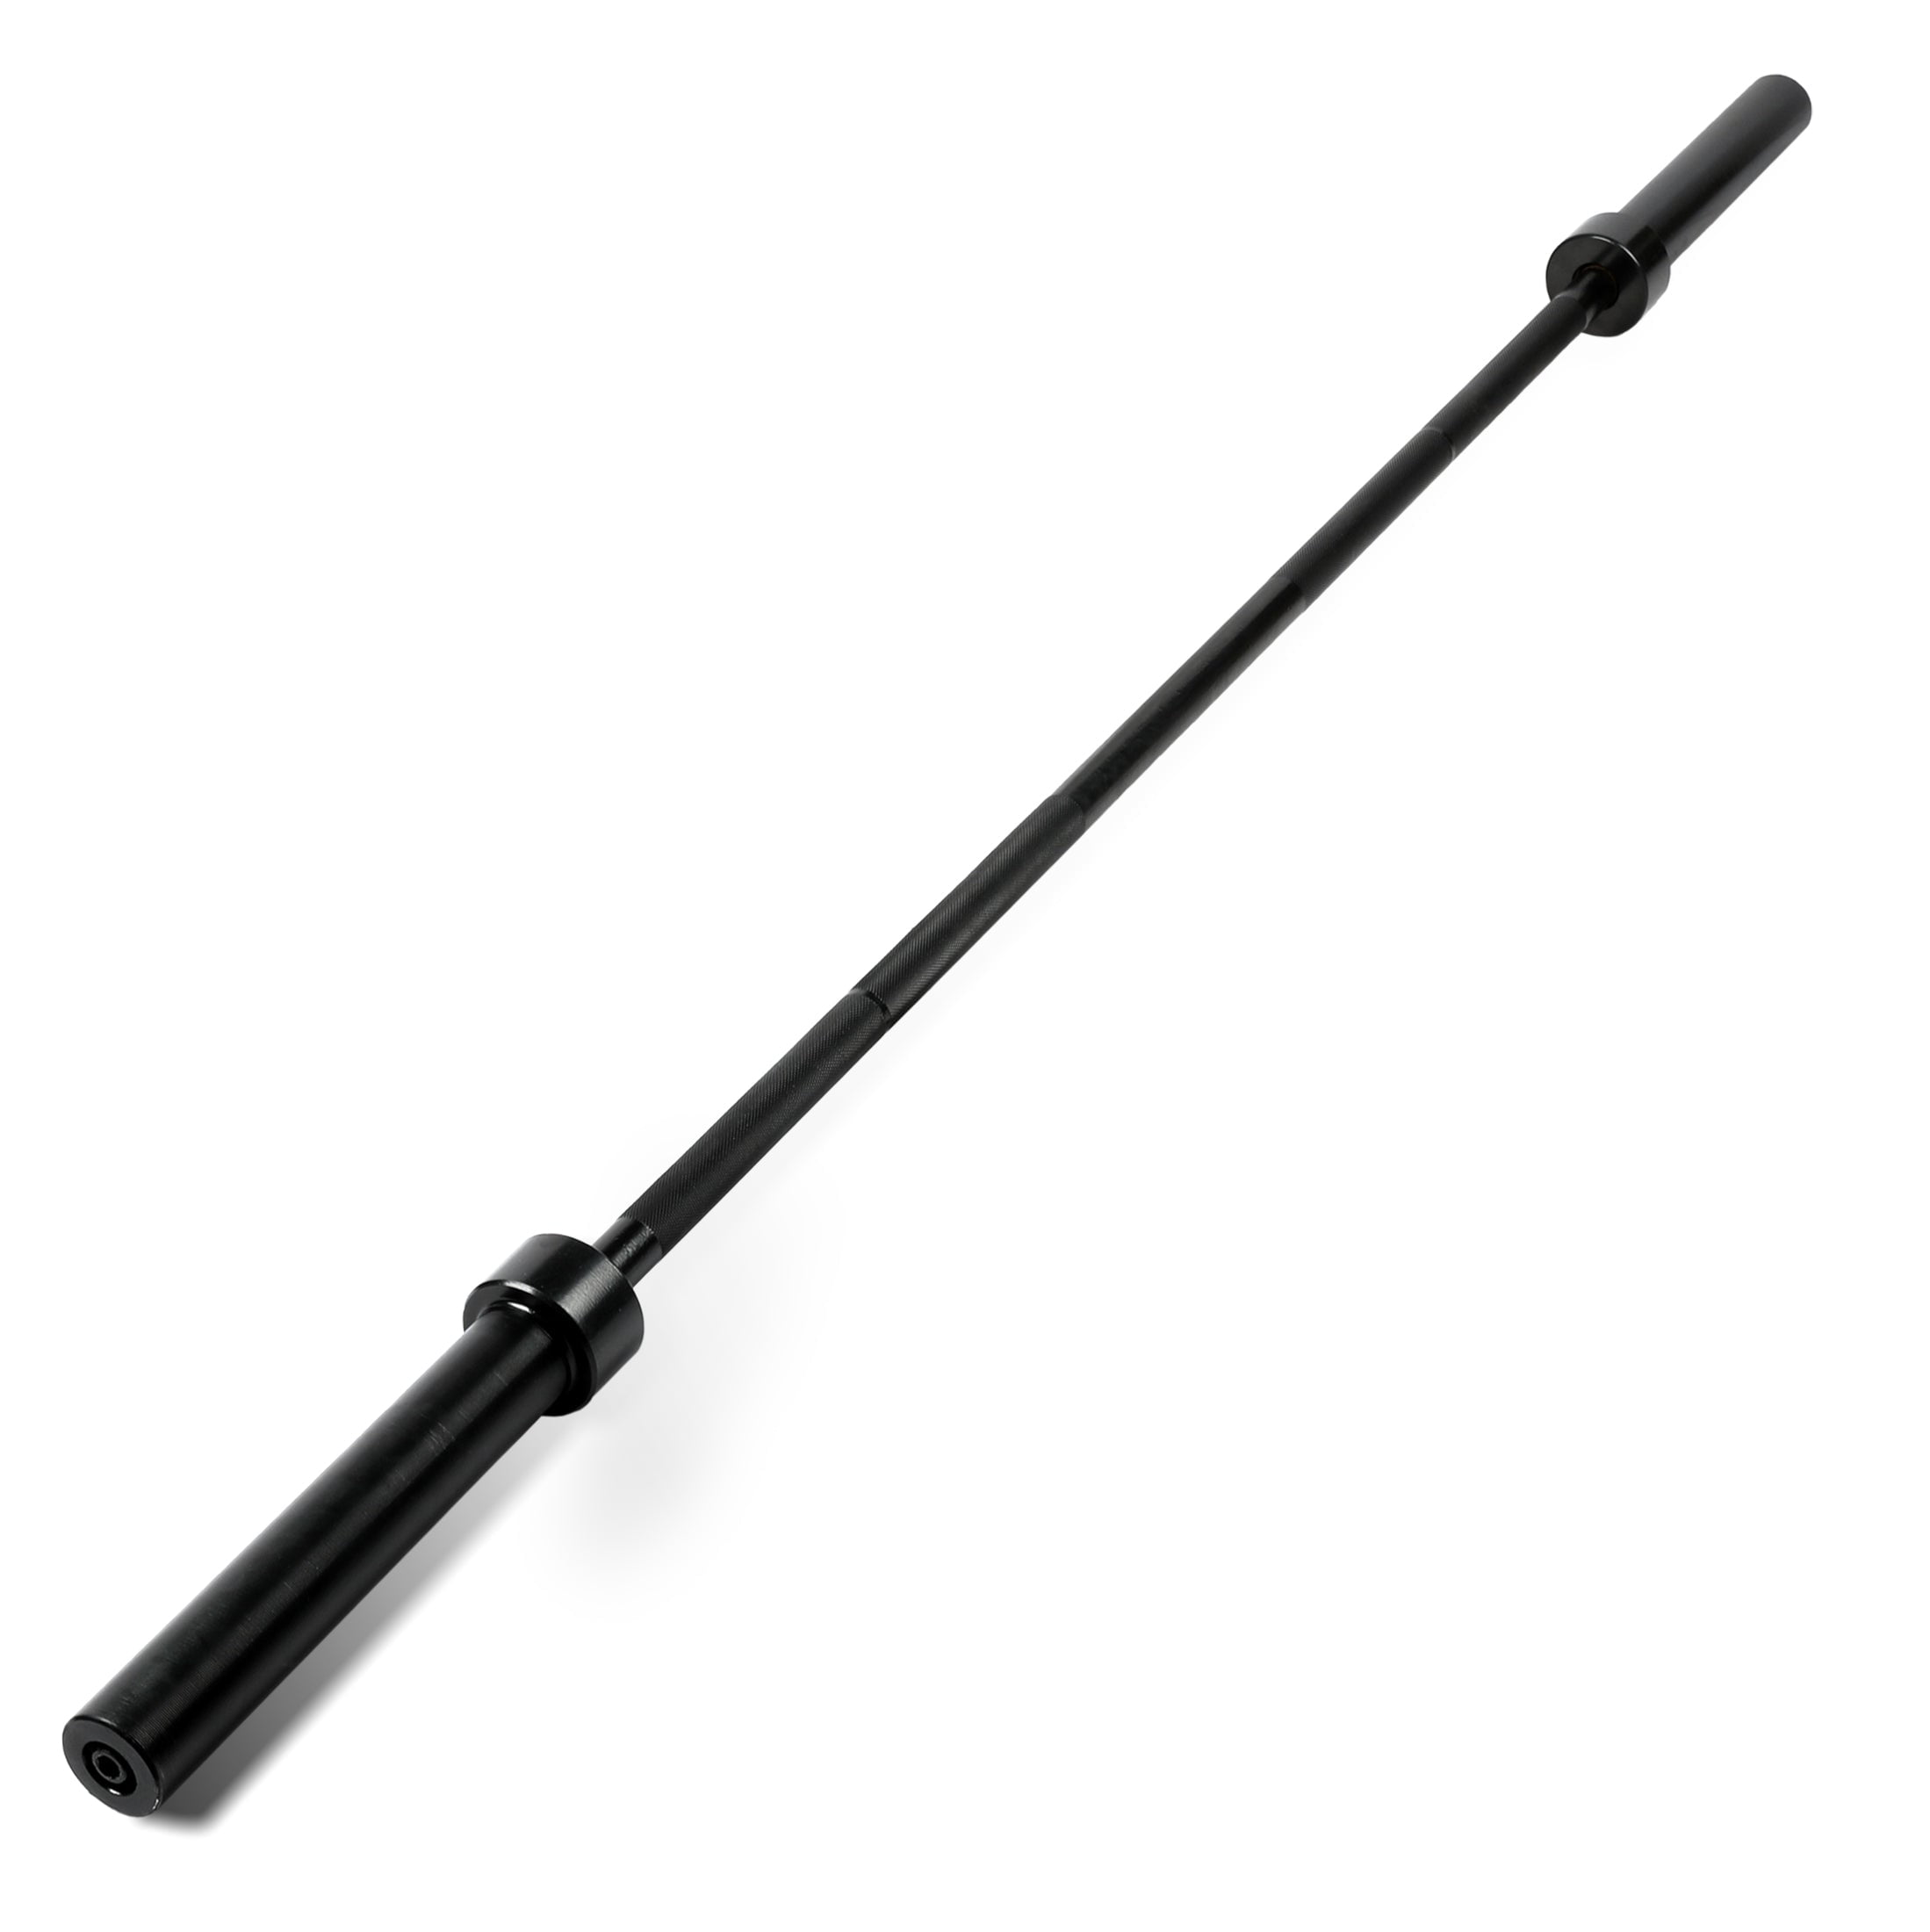 PRCTZ, 2-Inch Olympic Barbell Weightlifting Bar, 7ft, 700-Pound Capacity